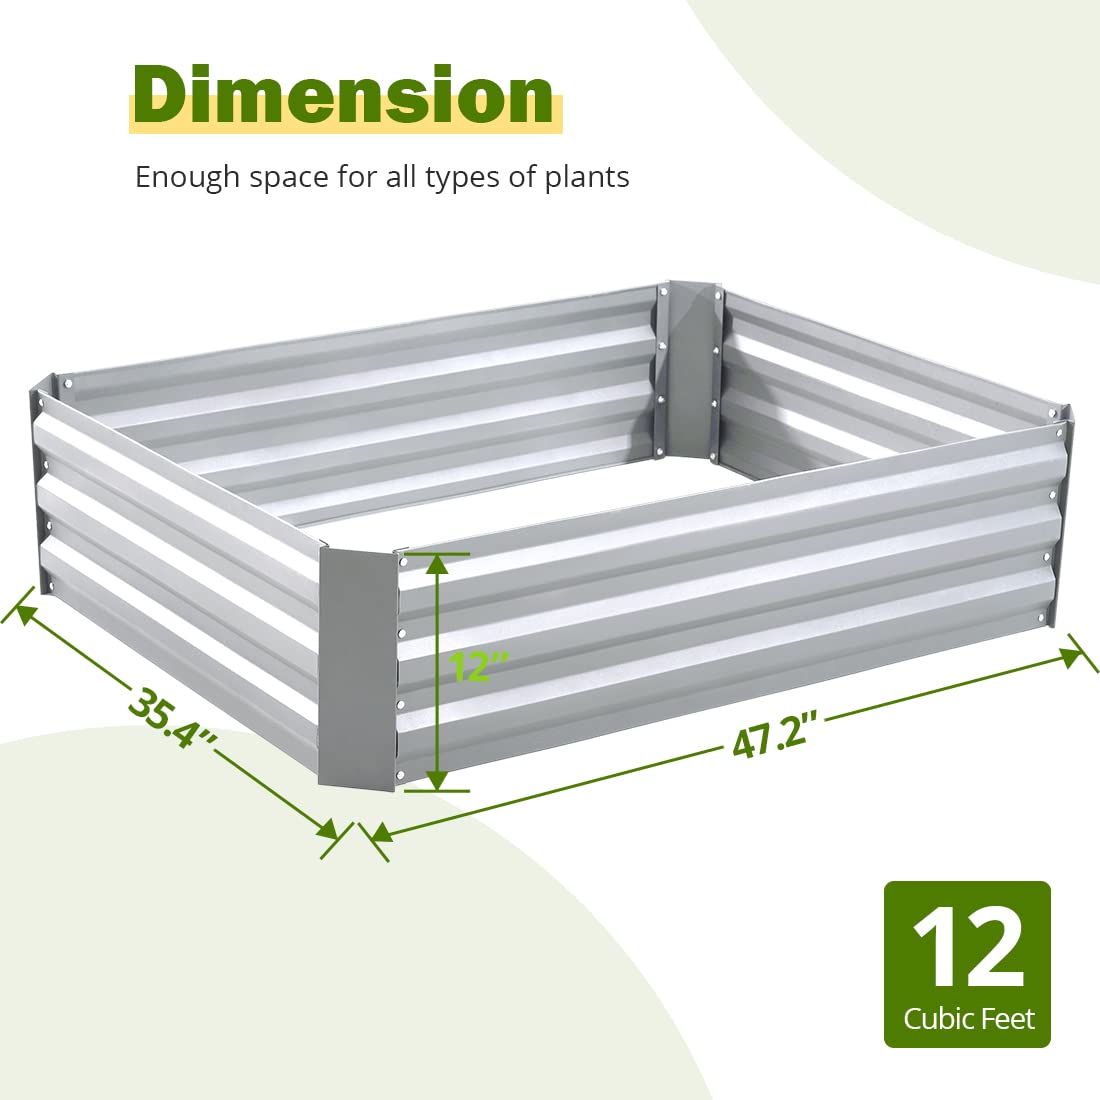 4x3x1 silver garden bed dimension#size_4x3x1ft